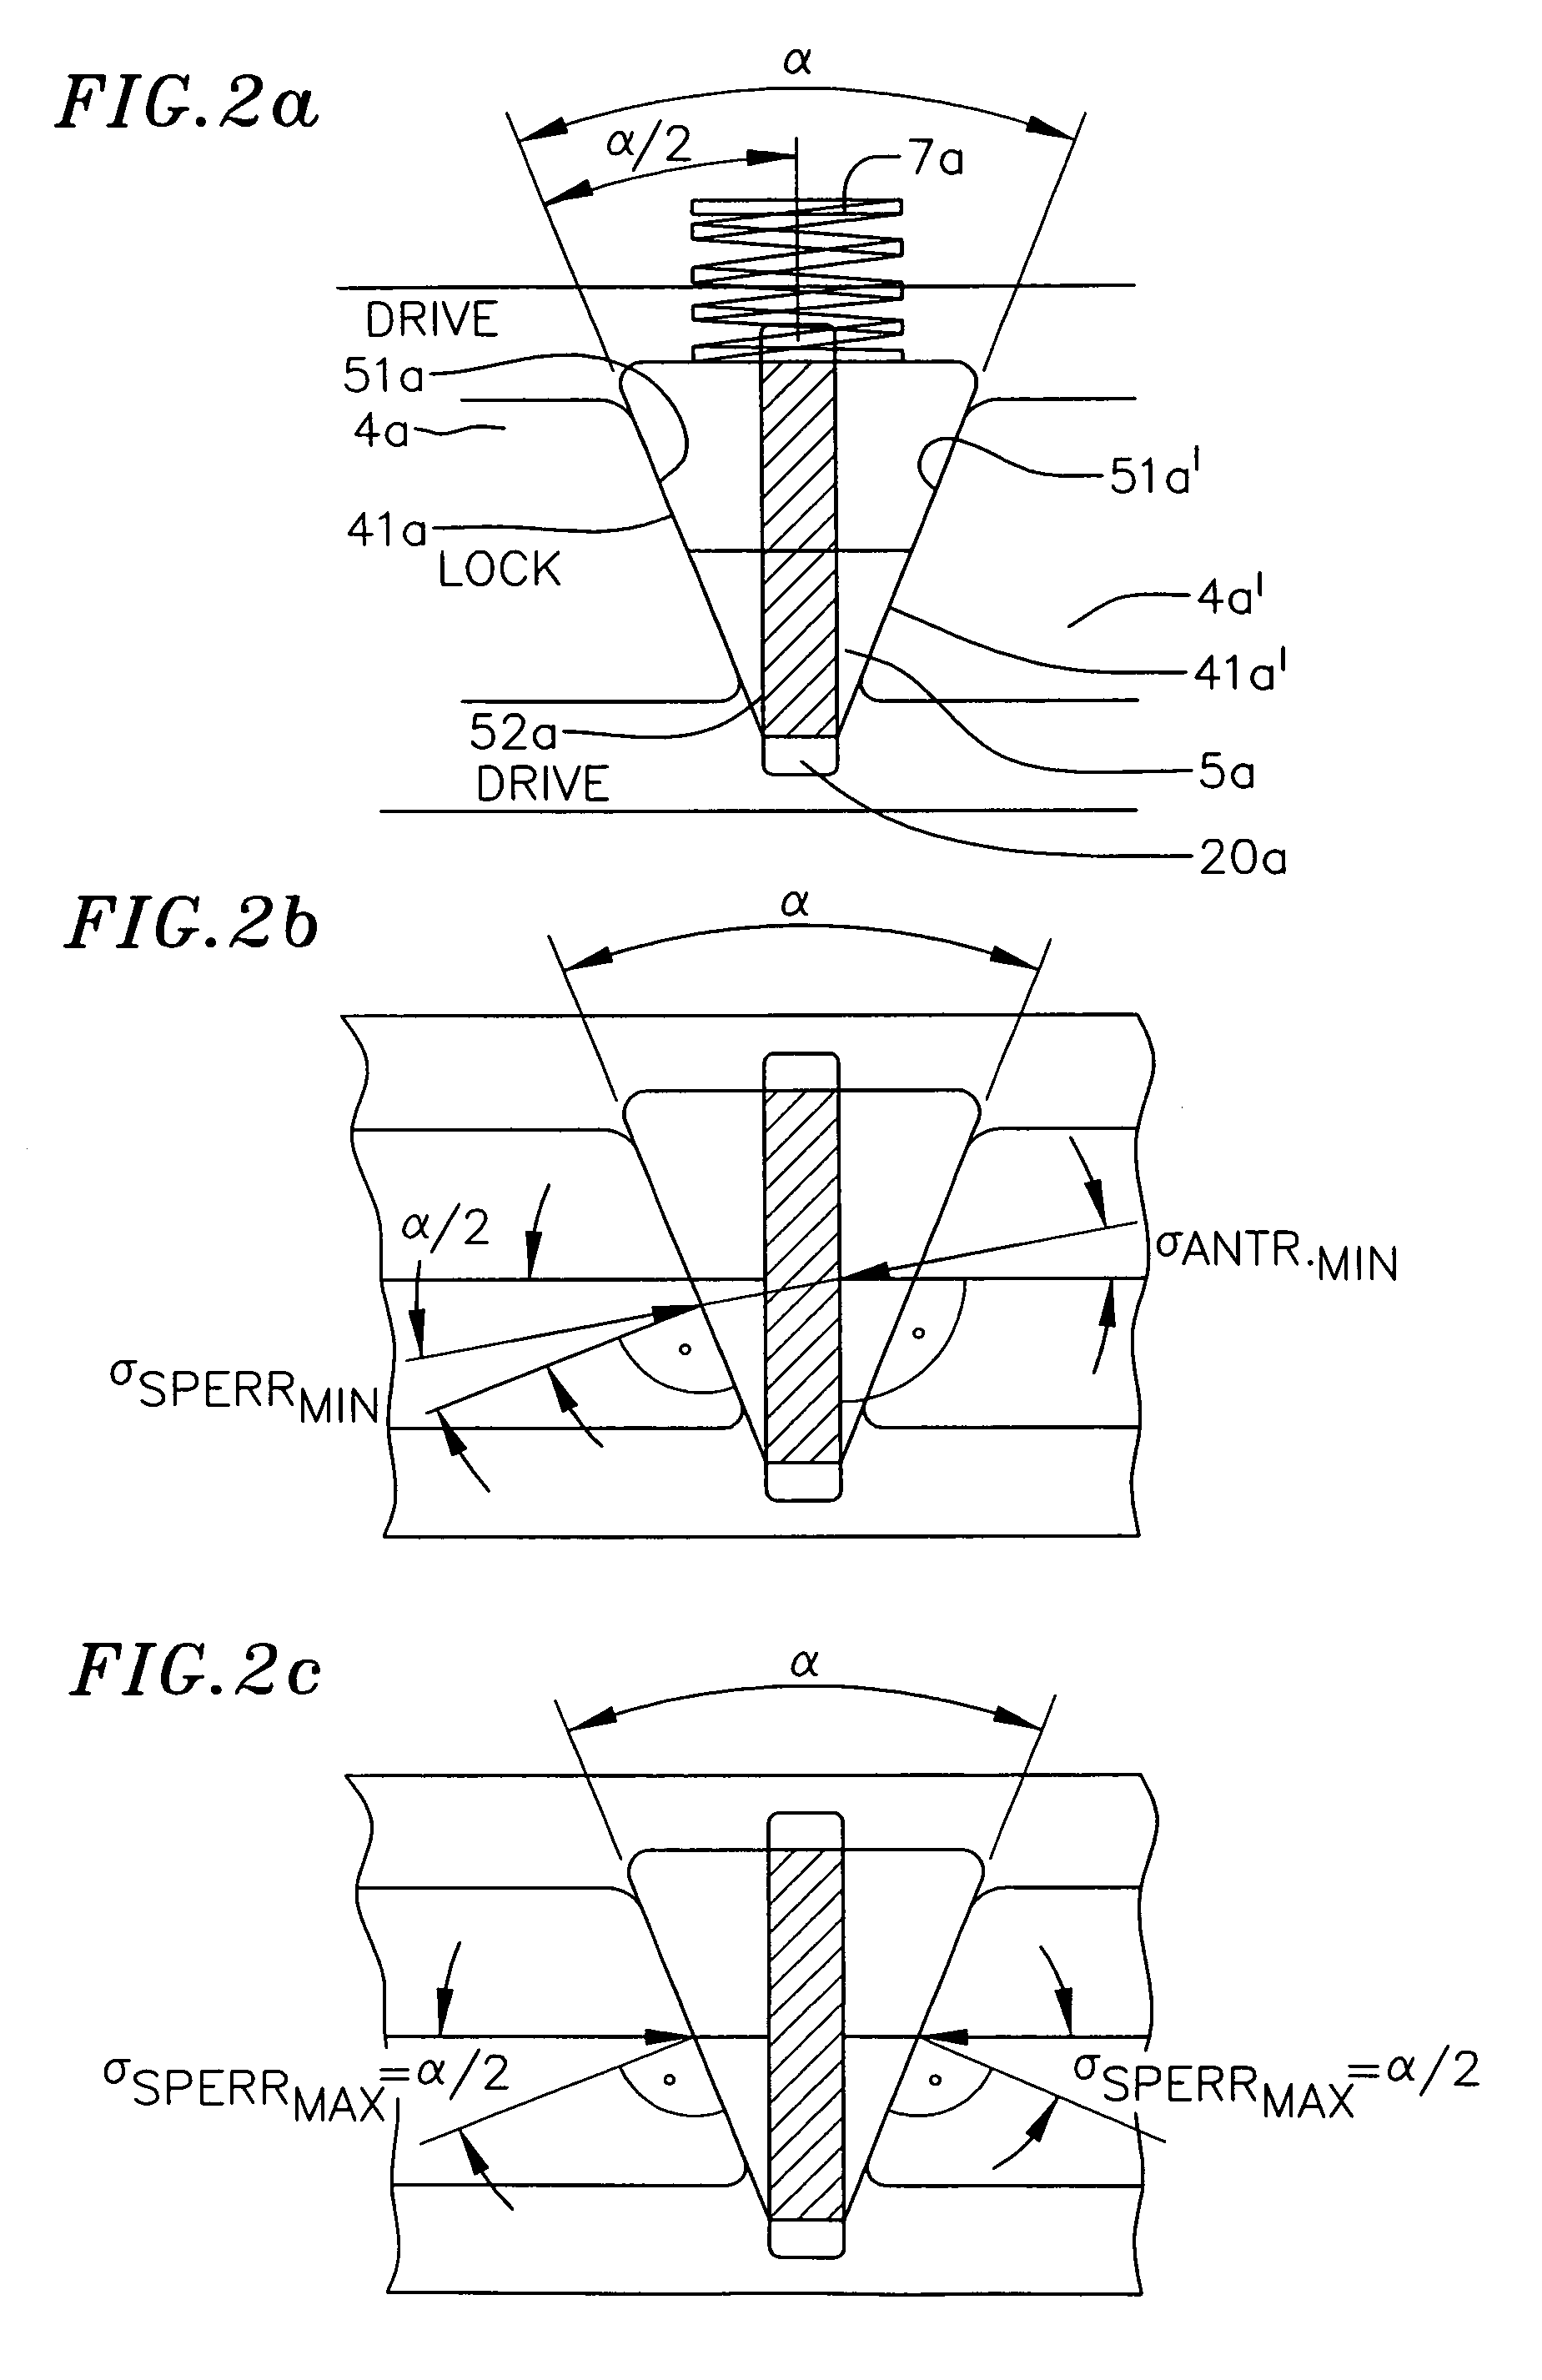 Displacement device